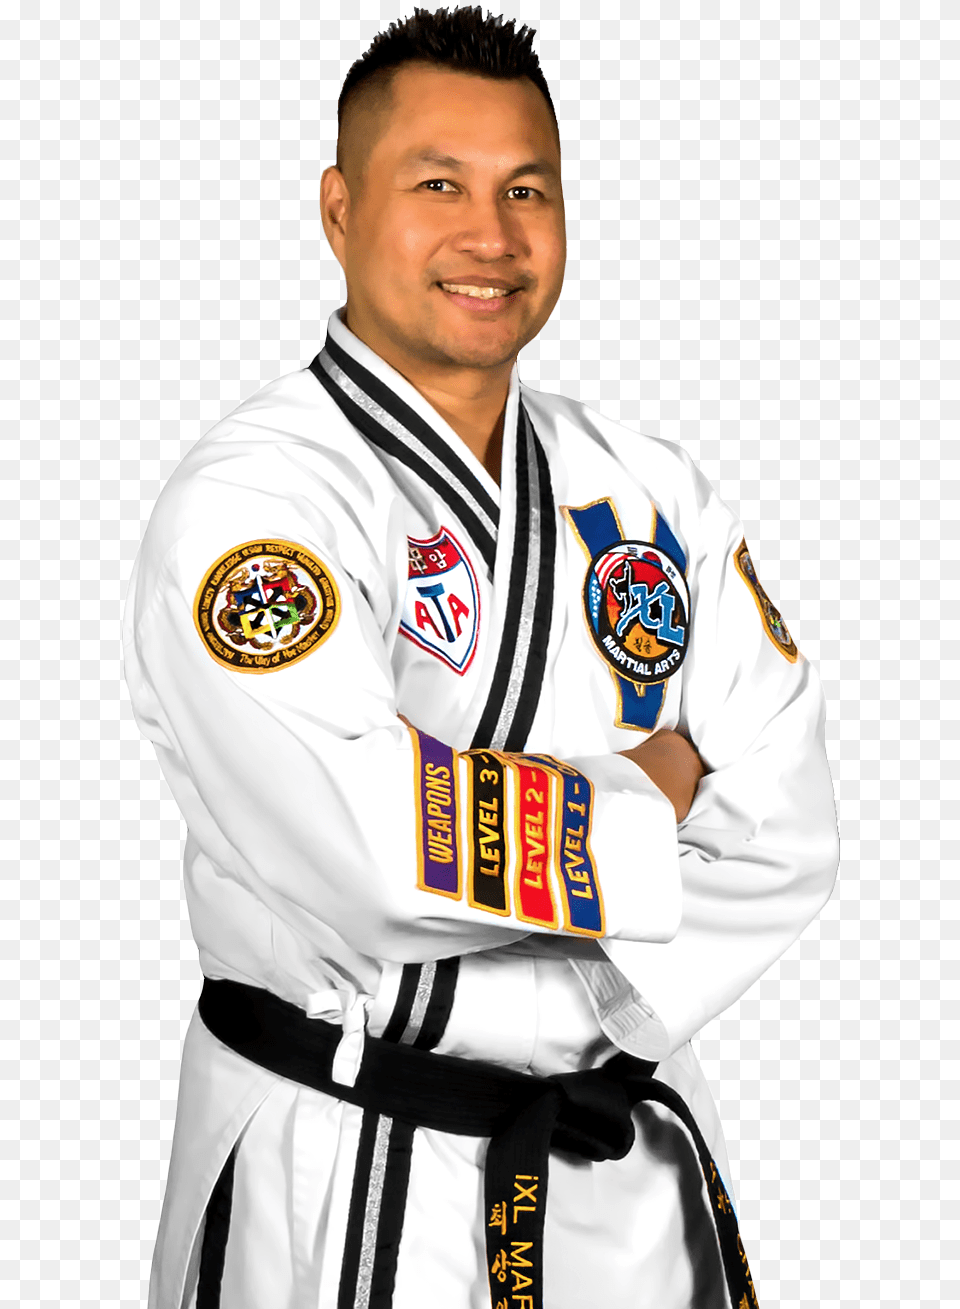 Karate, Sport, Person, Martial Arts, Man Free Png